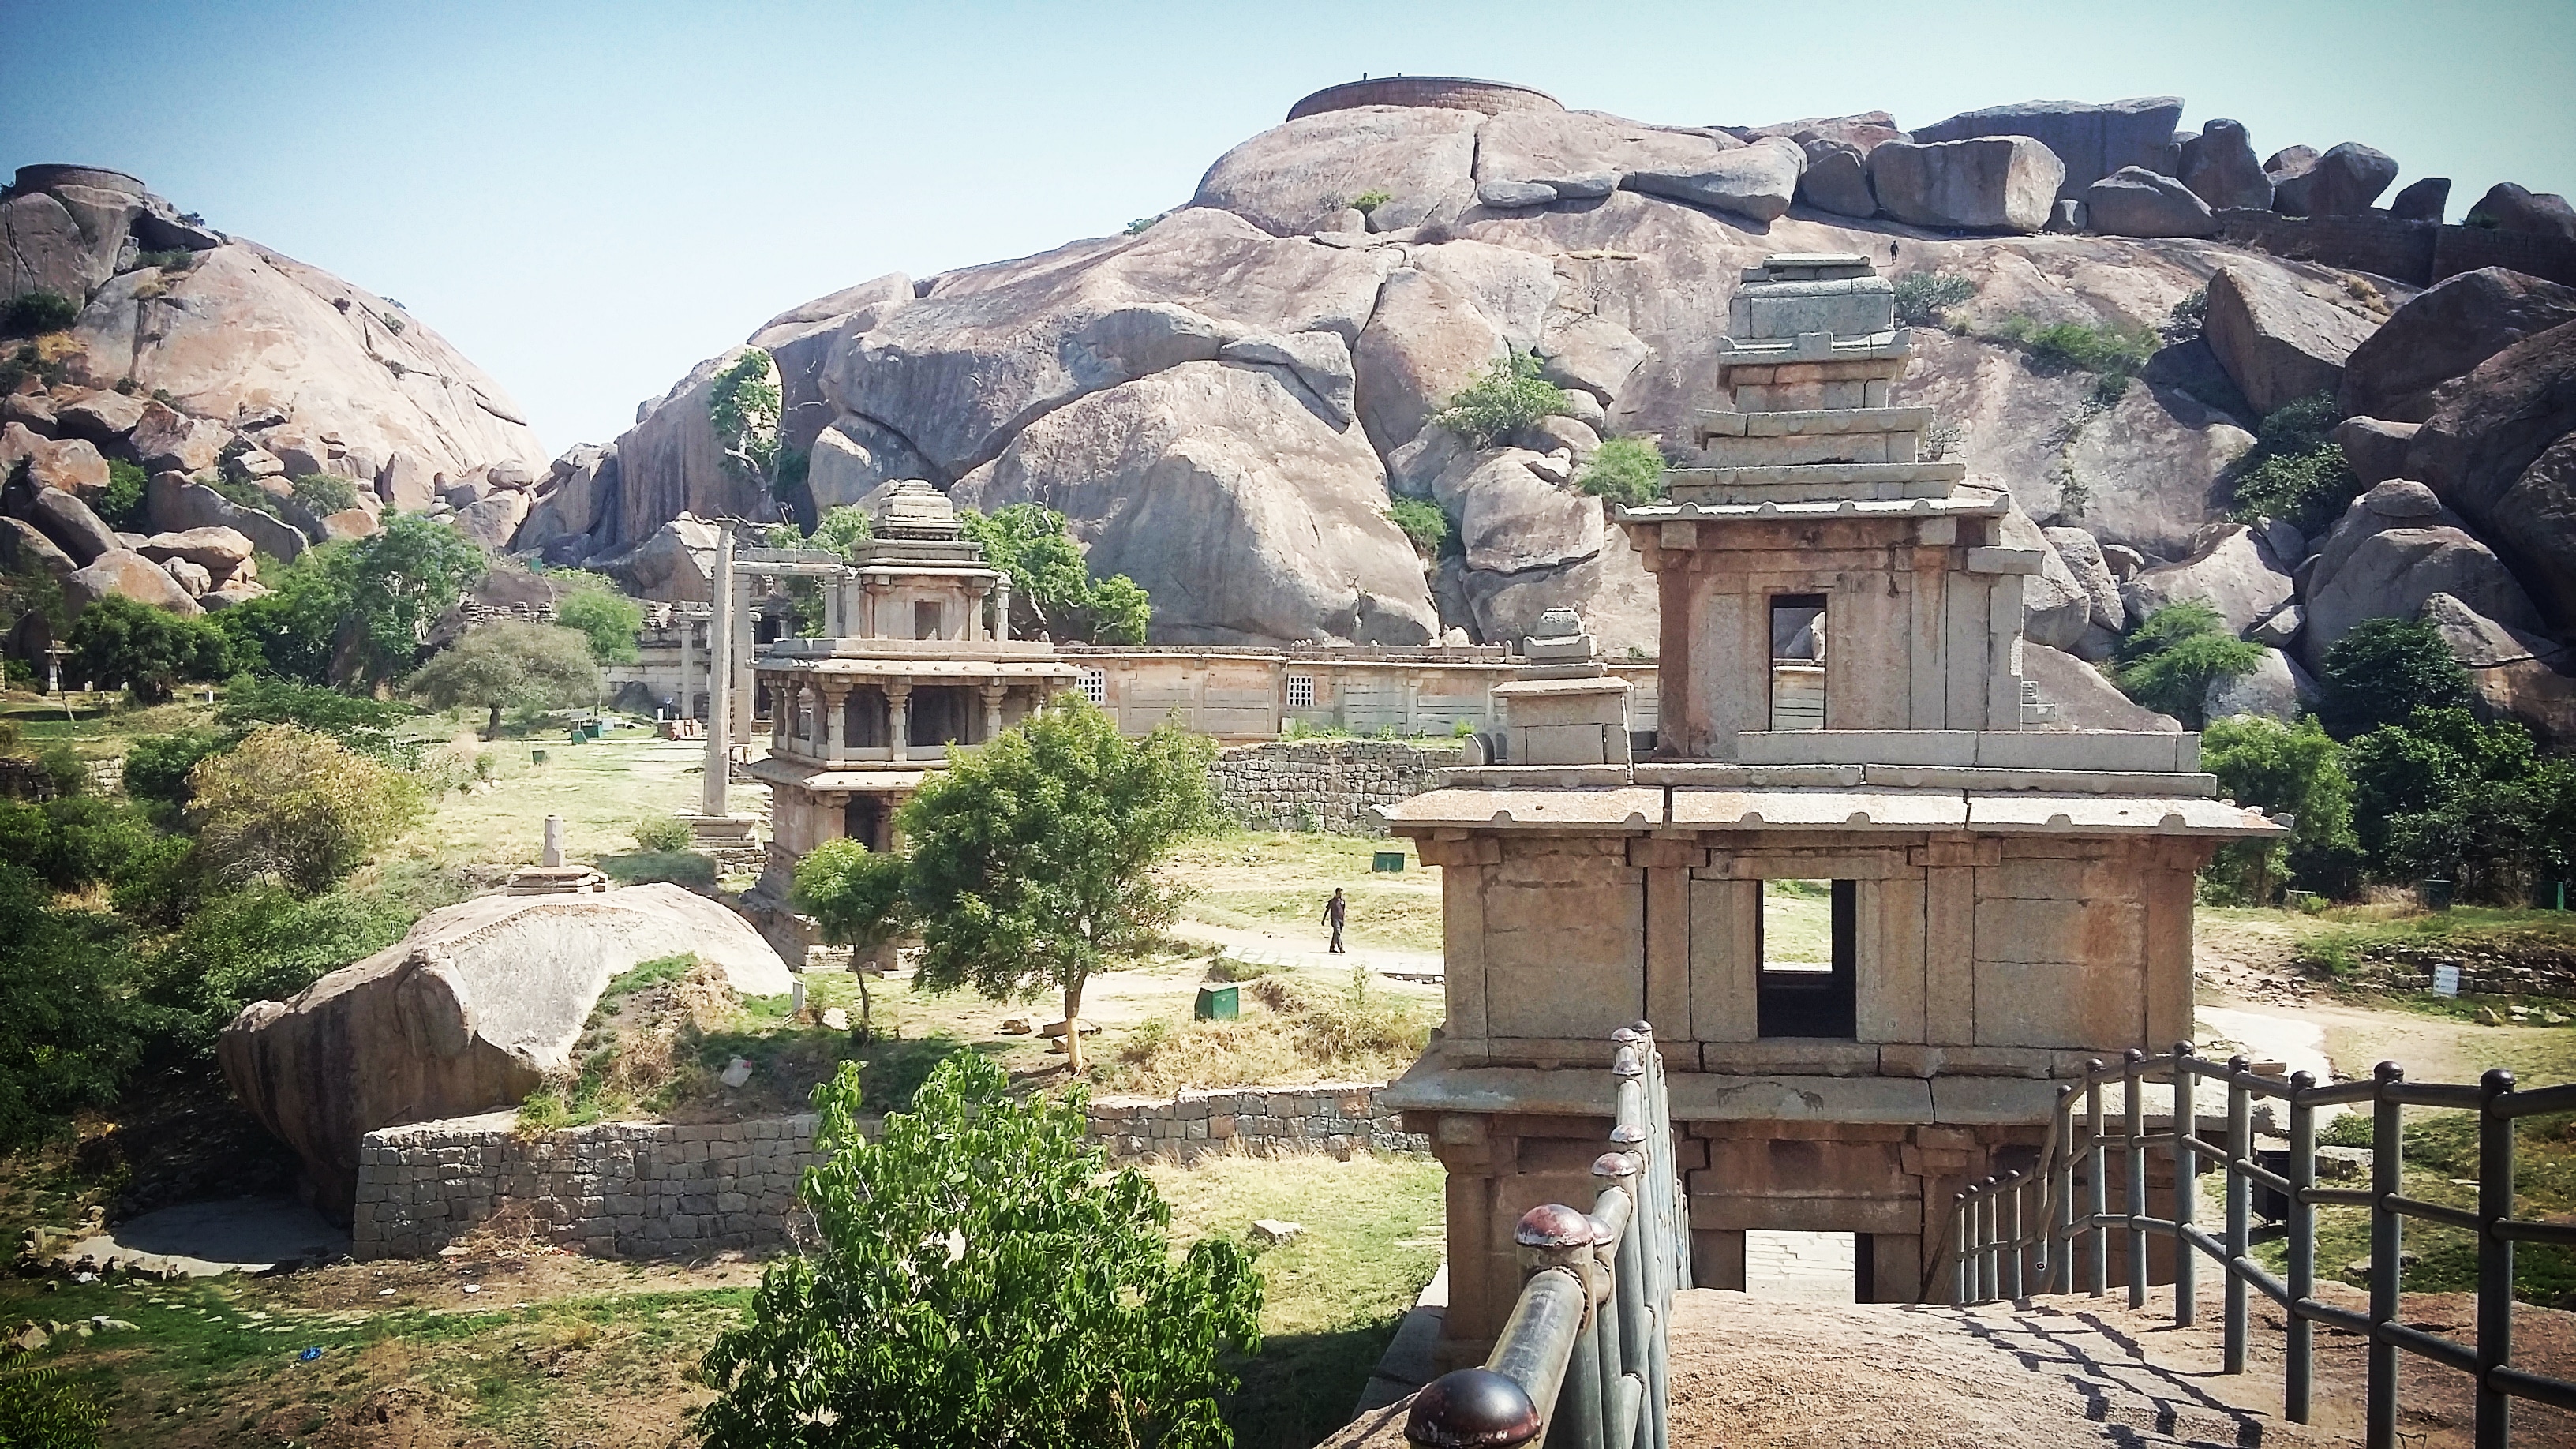 File:The magnificent fort of Chitradurga.jpg - Wikimedia Commons